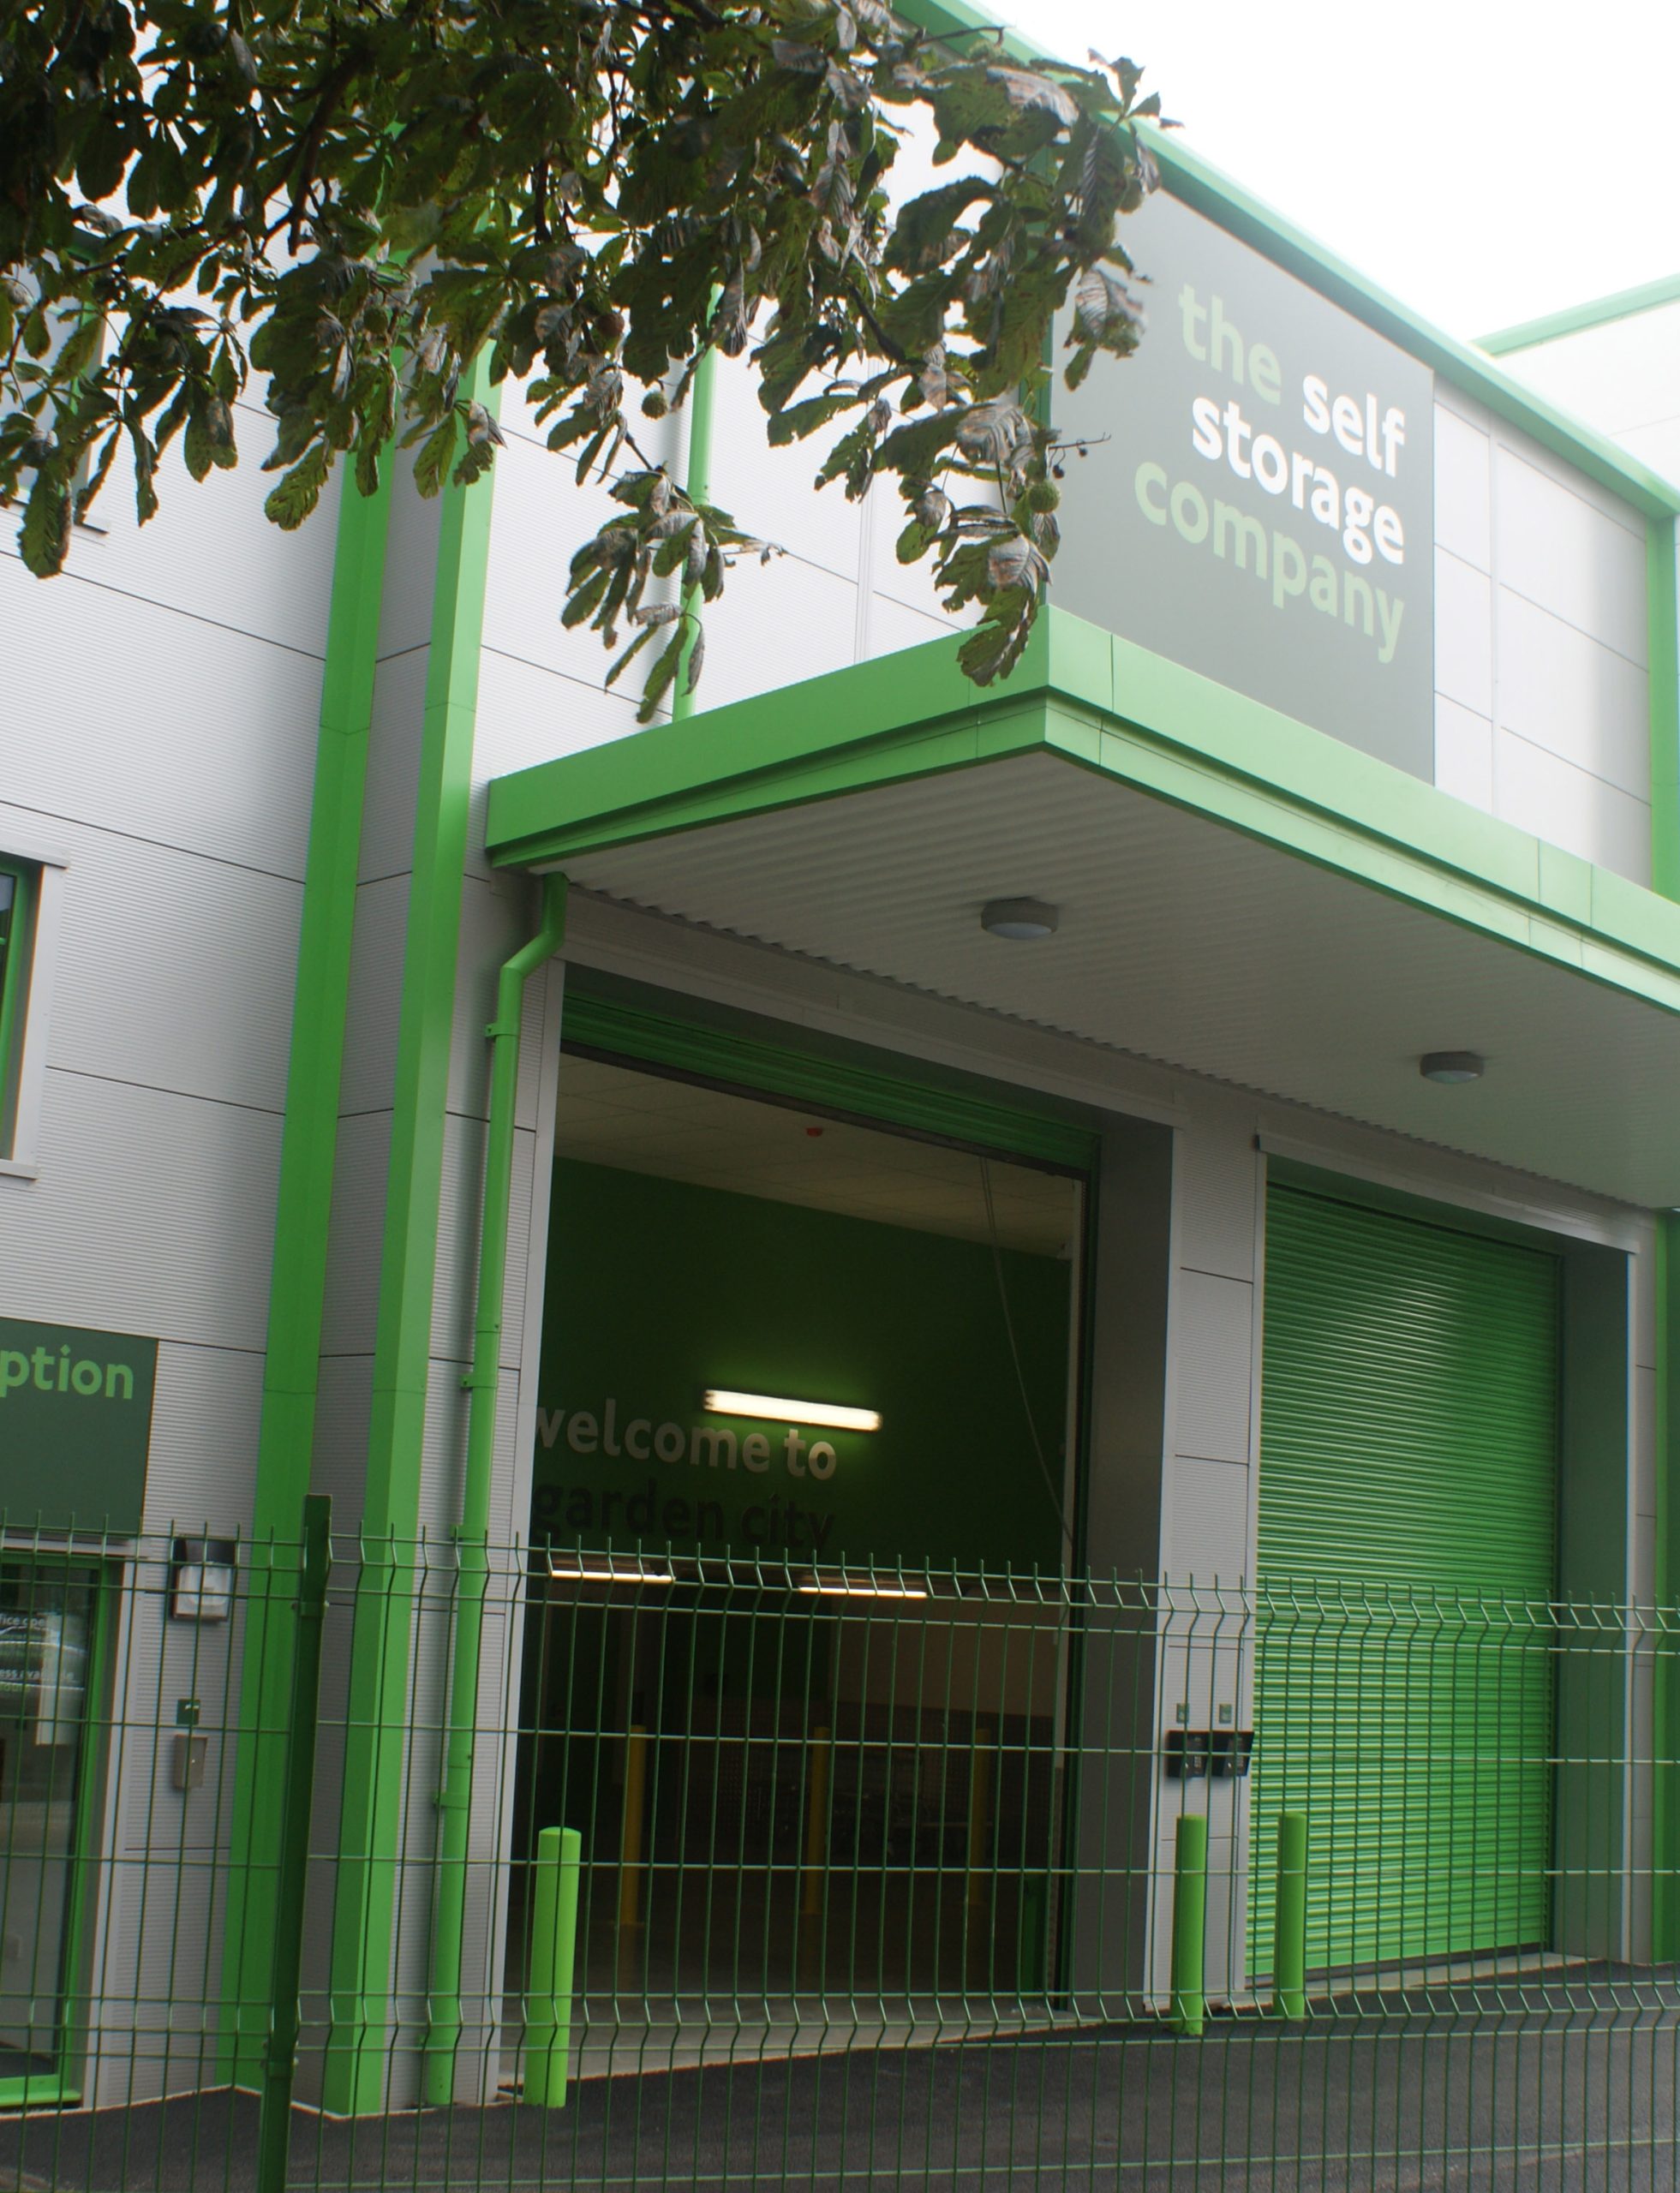 About Us Safe Secure Self Storage